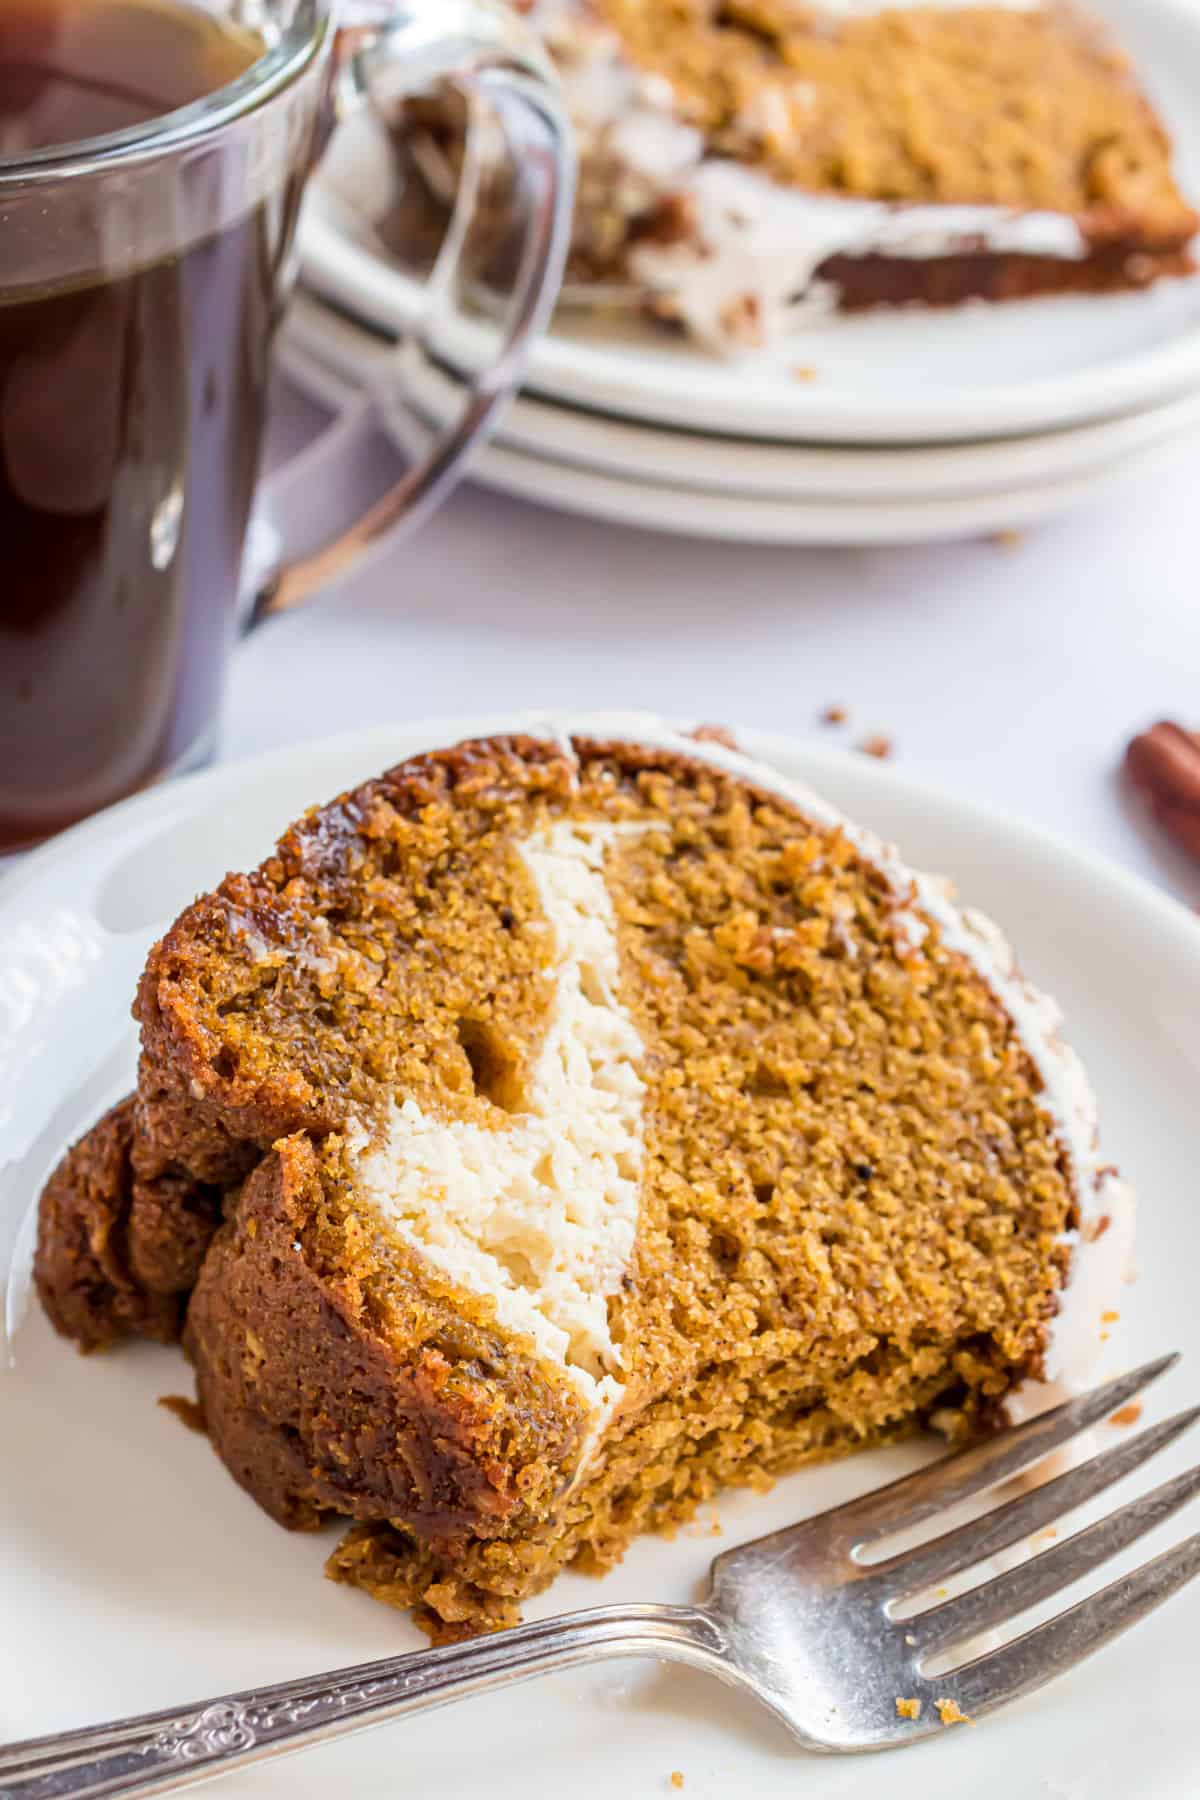 Slice of pumpkin cake with a bite taken out.